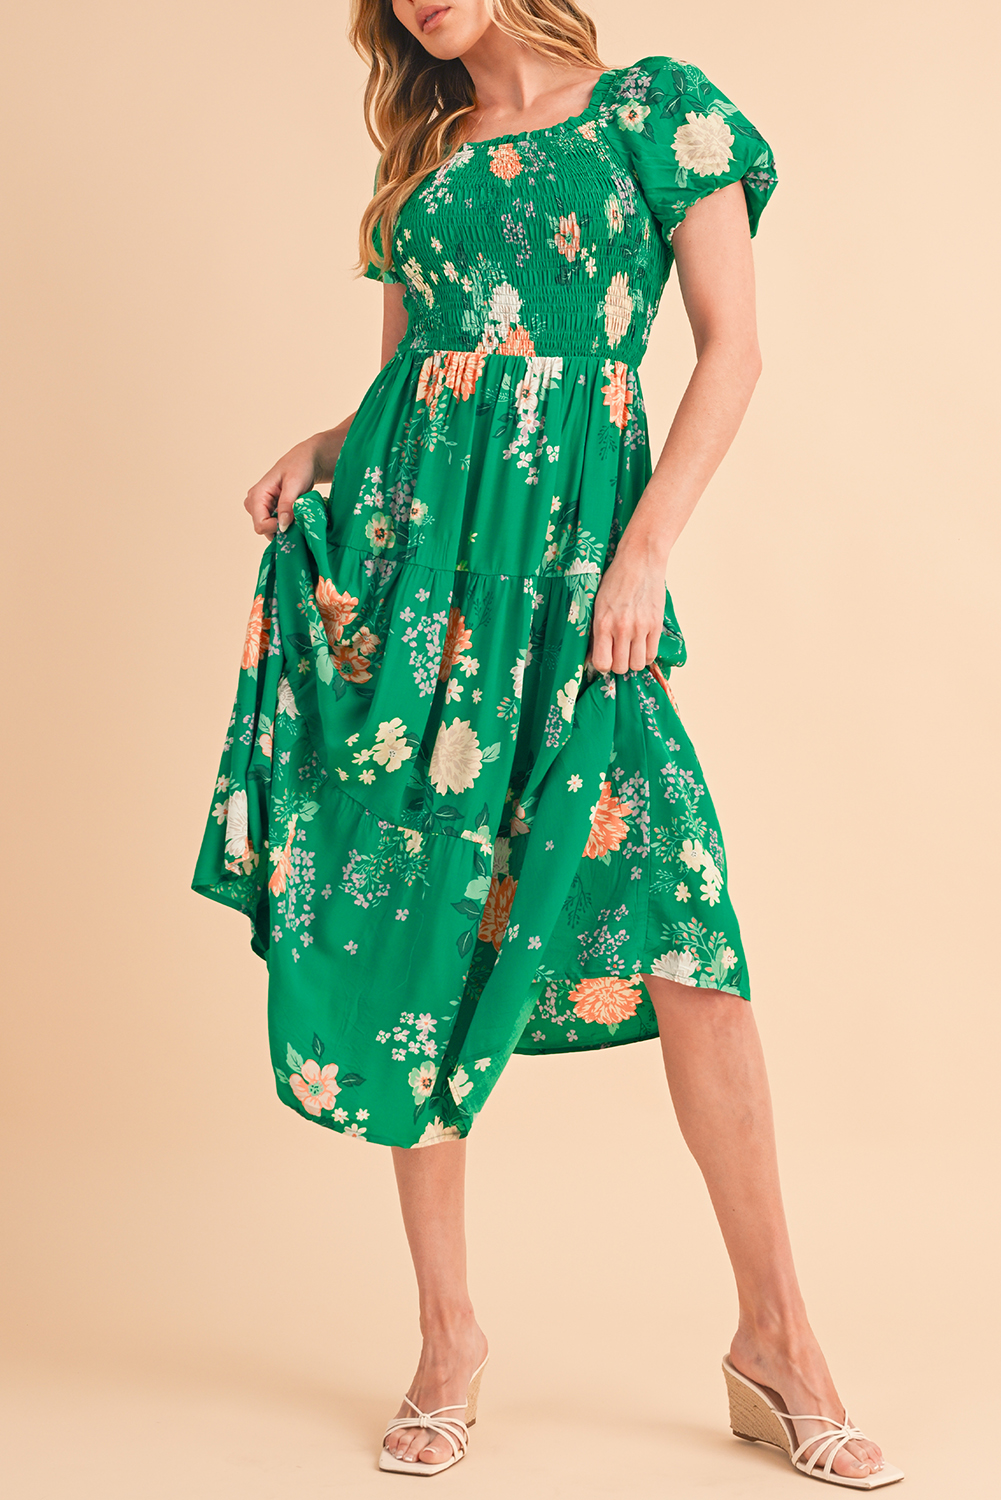 Shewin Wholesale Apparel Green Floral Print Bubble Sleeve Smocked Tiered Midi DRESS